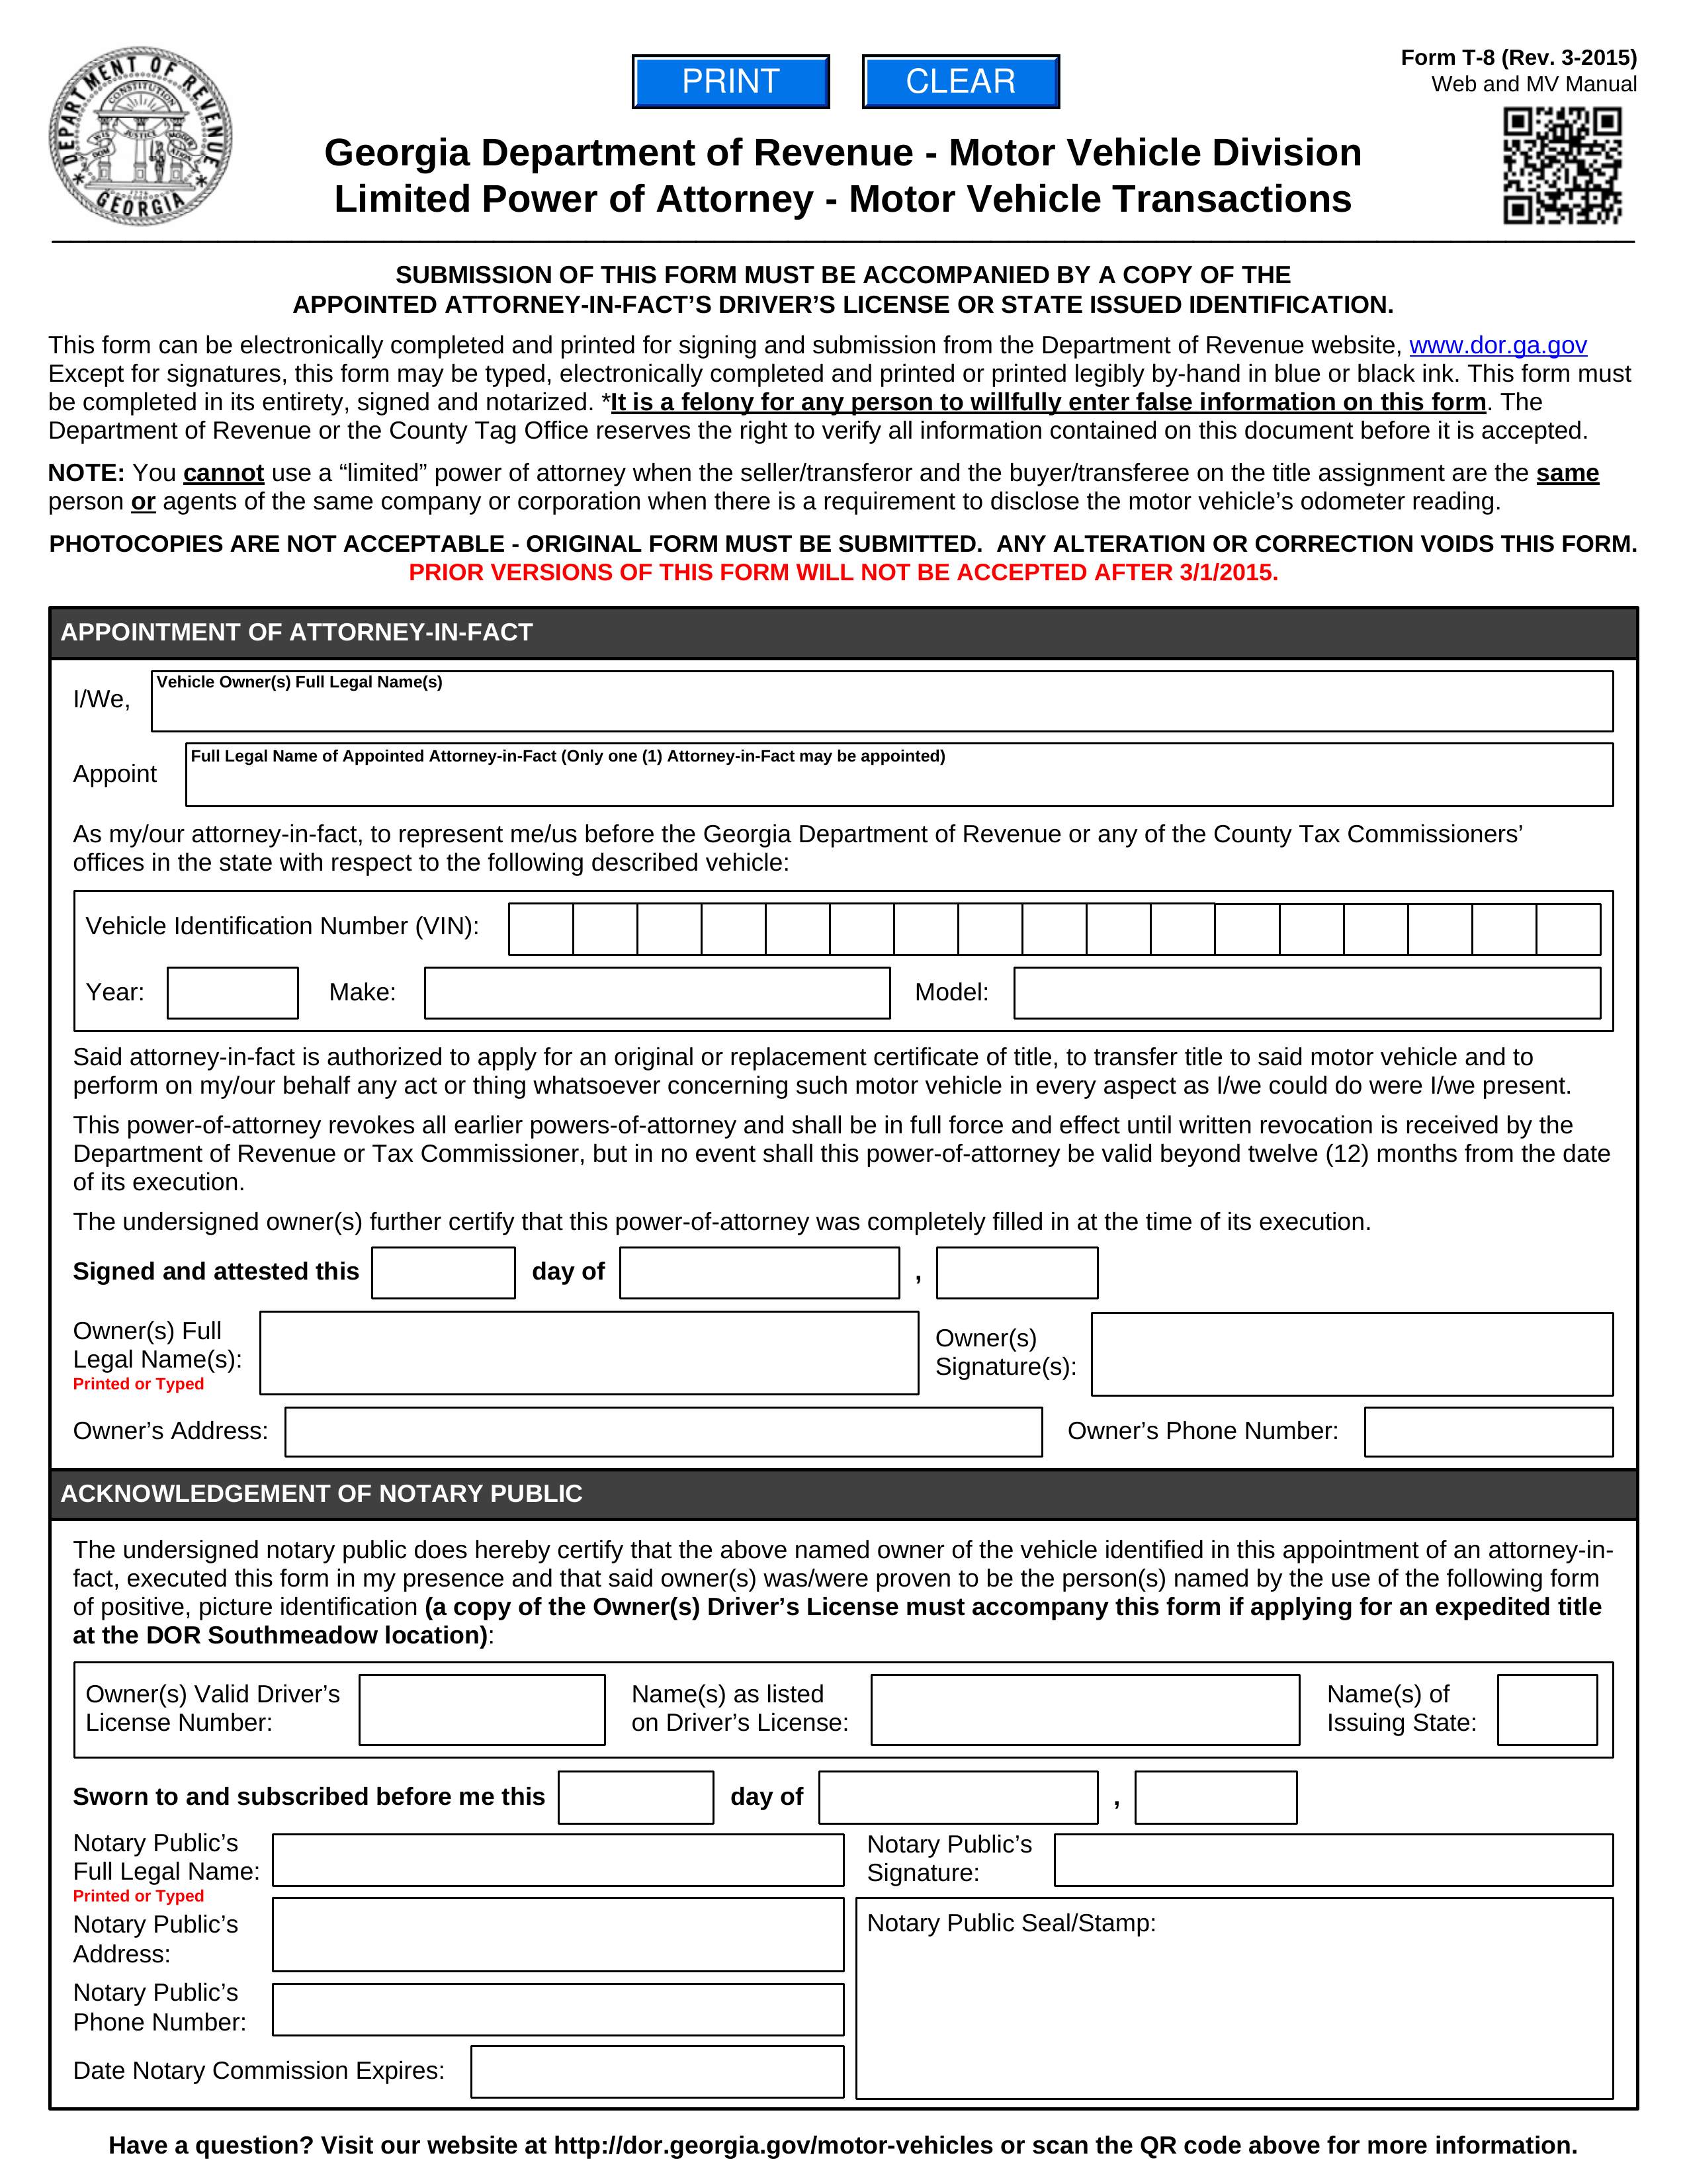 Georgia Motor Vehicle Power of Attorney (Form T-8)